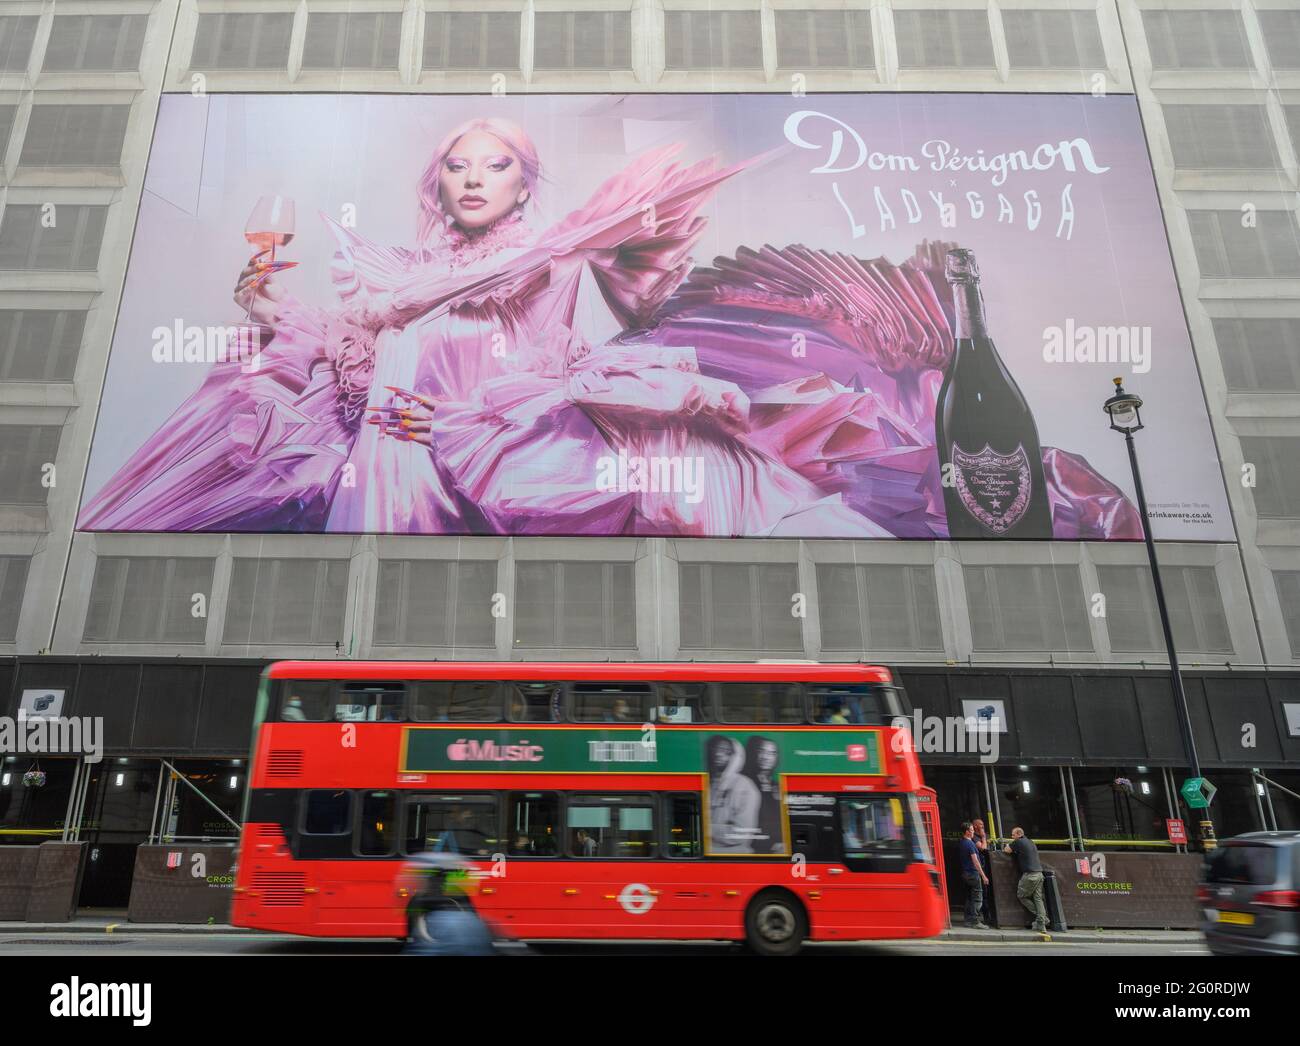 Piccadilly, London, UK. 3 June 2021. A giant poster depicting Lady Gaga and Dom Perignon Champagne dominates the facade of a building under renovation in Piccadilly, opposite the Ritz Hotel. Credit: Malcolm Park/Alamy Live News. Stock Photo